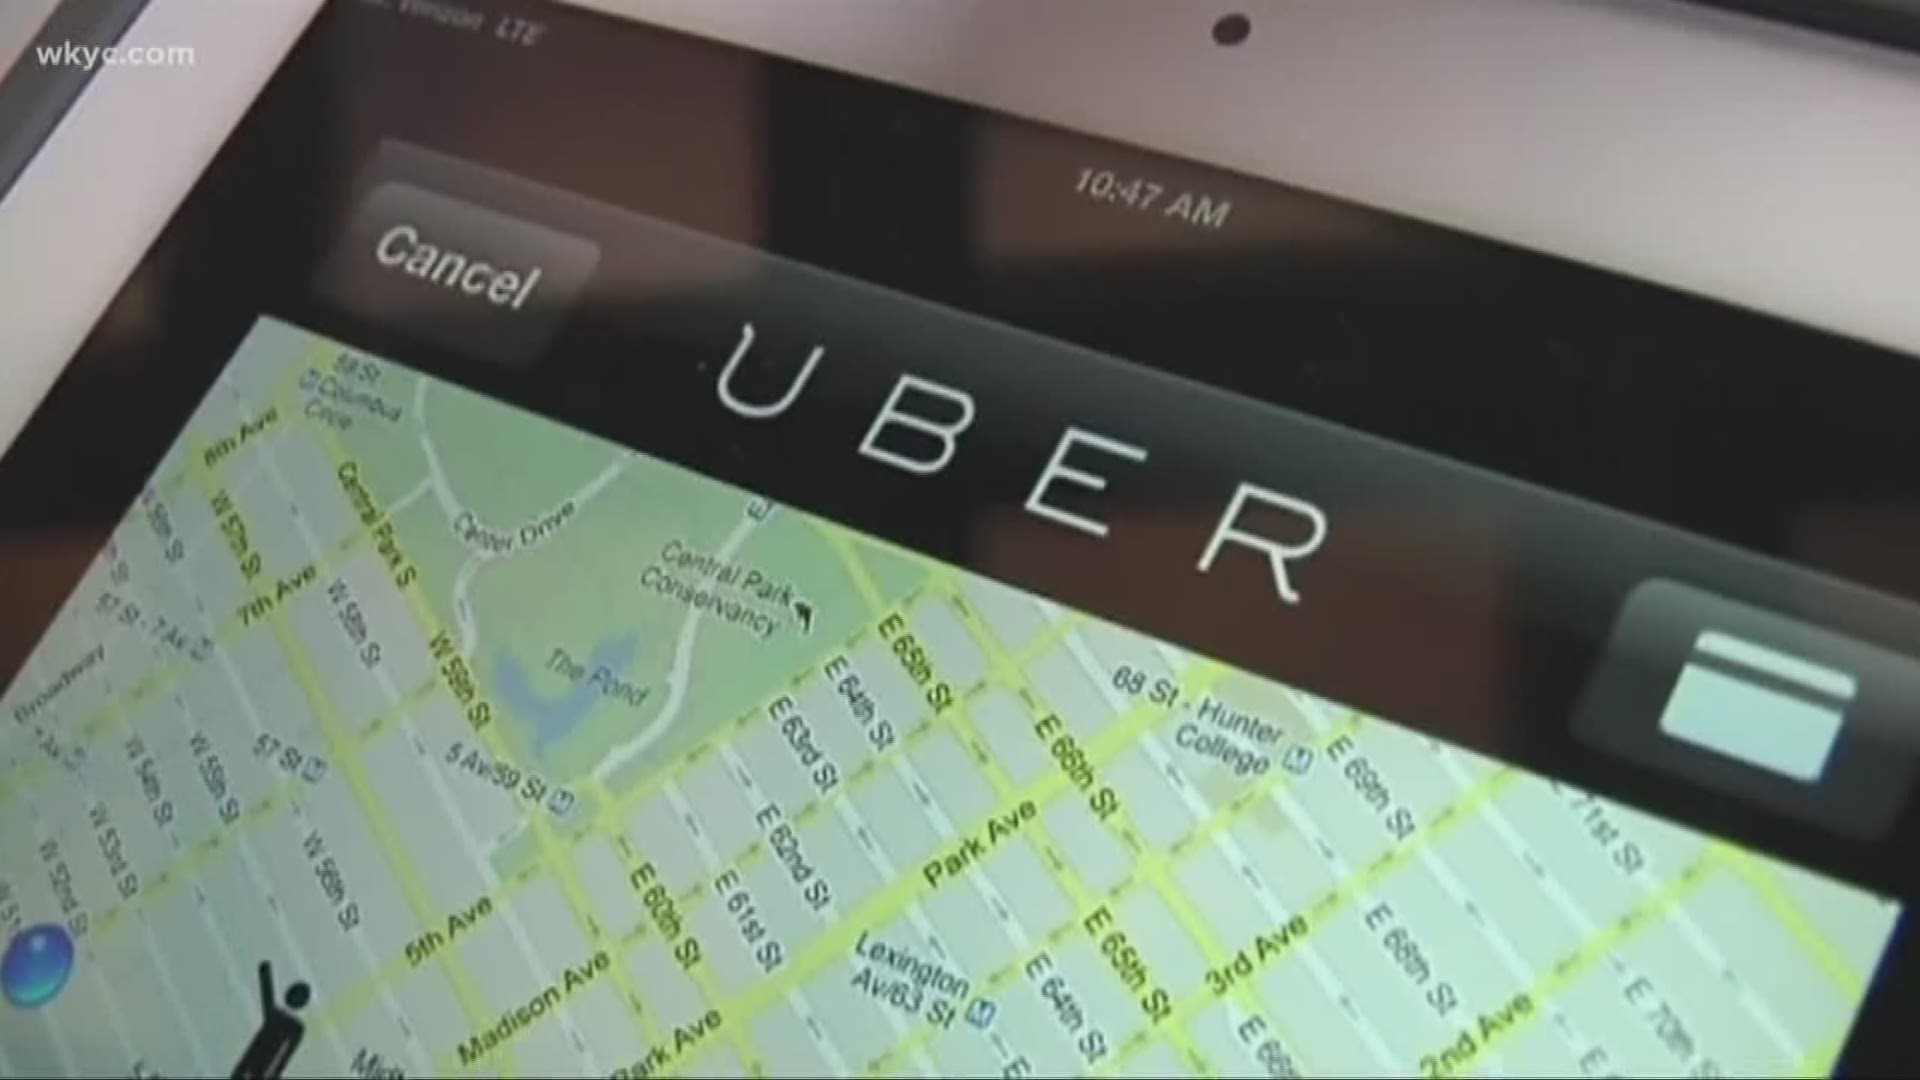 Concerns about safety recalls involving Uber or Lyft rideshare services